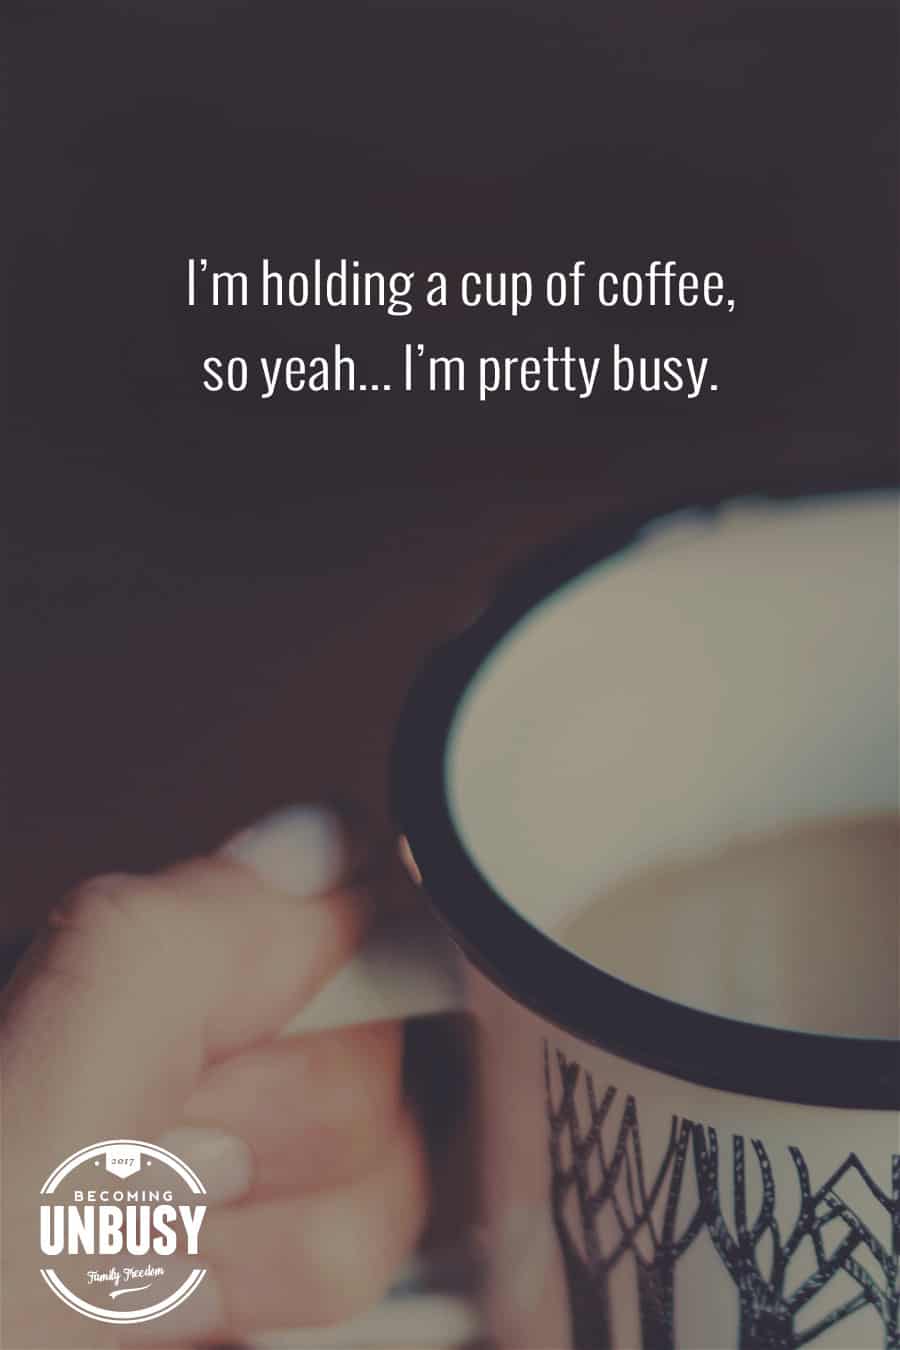 10 Good Morning Quotes - I'm holding a cup of coffee, so yeah.... I'm pretty busy. #lifequotes #quotes #goodmorningquotes #coffeequotes *Start the day off right with these morning inspirational quotes. Love this good morning motivation!